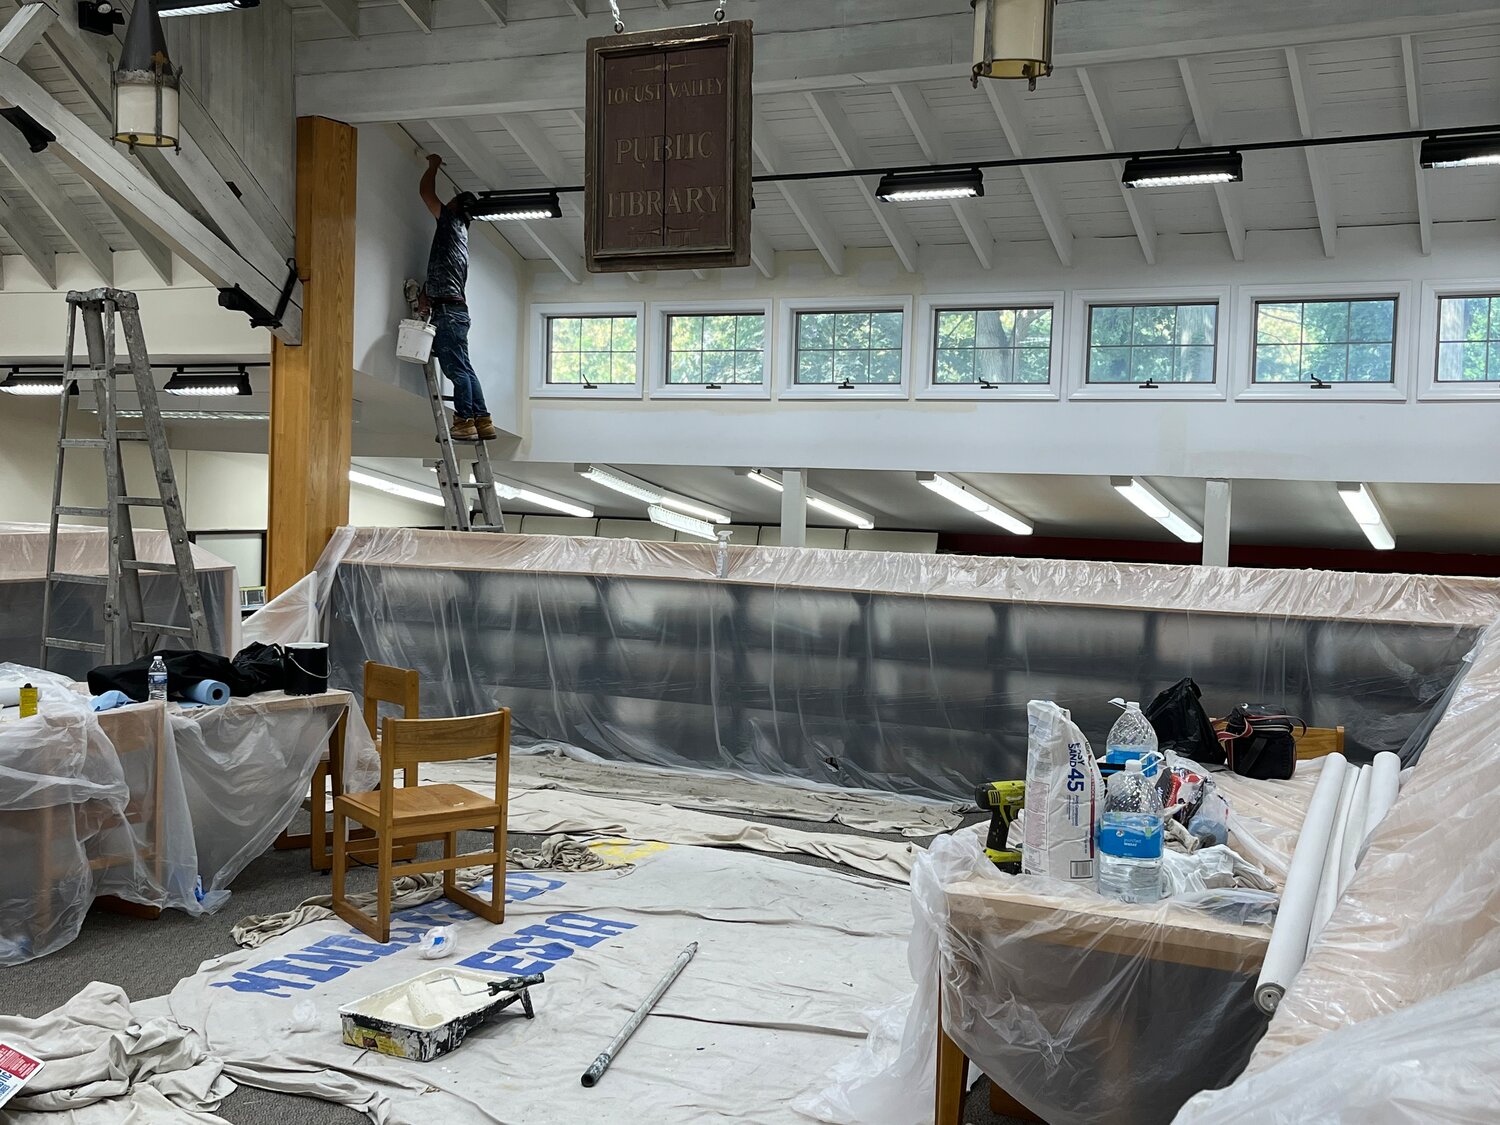 Workers have already begun repainting and recarpeting the interior of the Locust Valley Library.